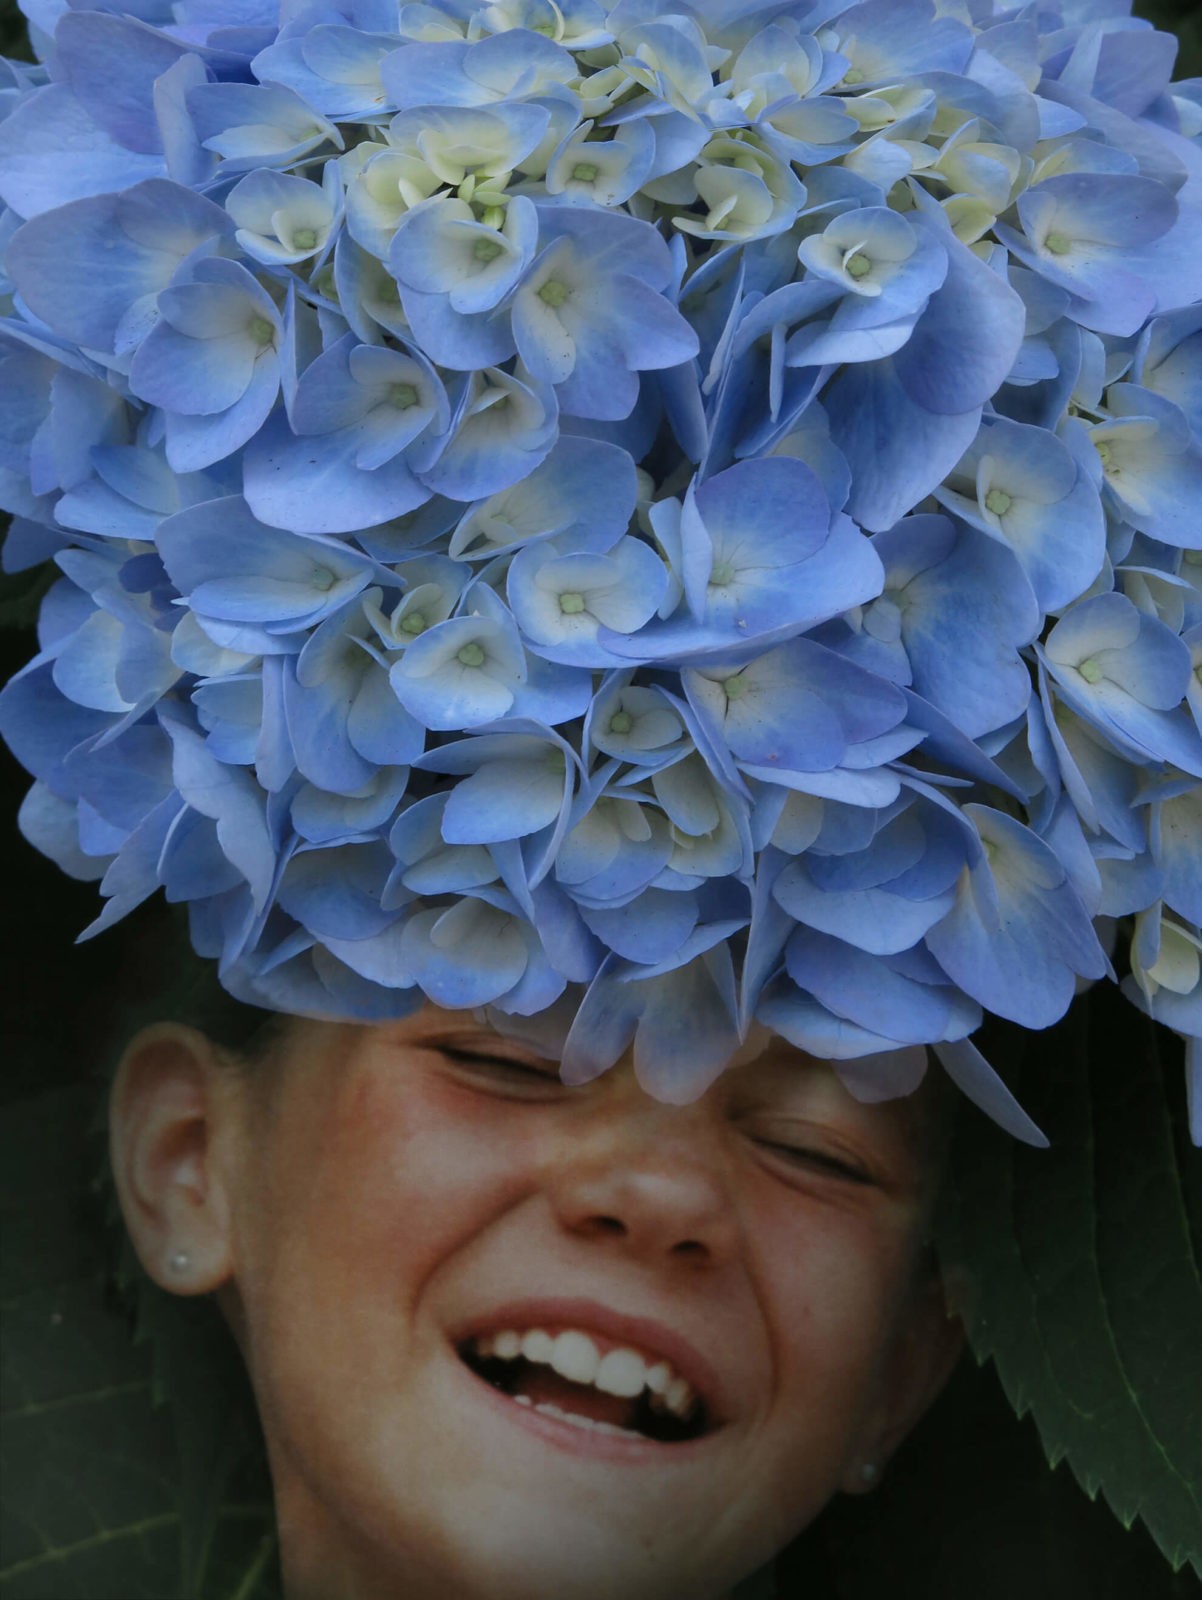 Robin Botie of Ithaca, New York, photographs a rhododendron and then Photoshops it over the face of her laughing daughter.